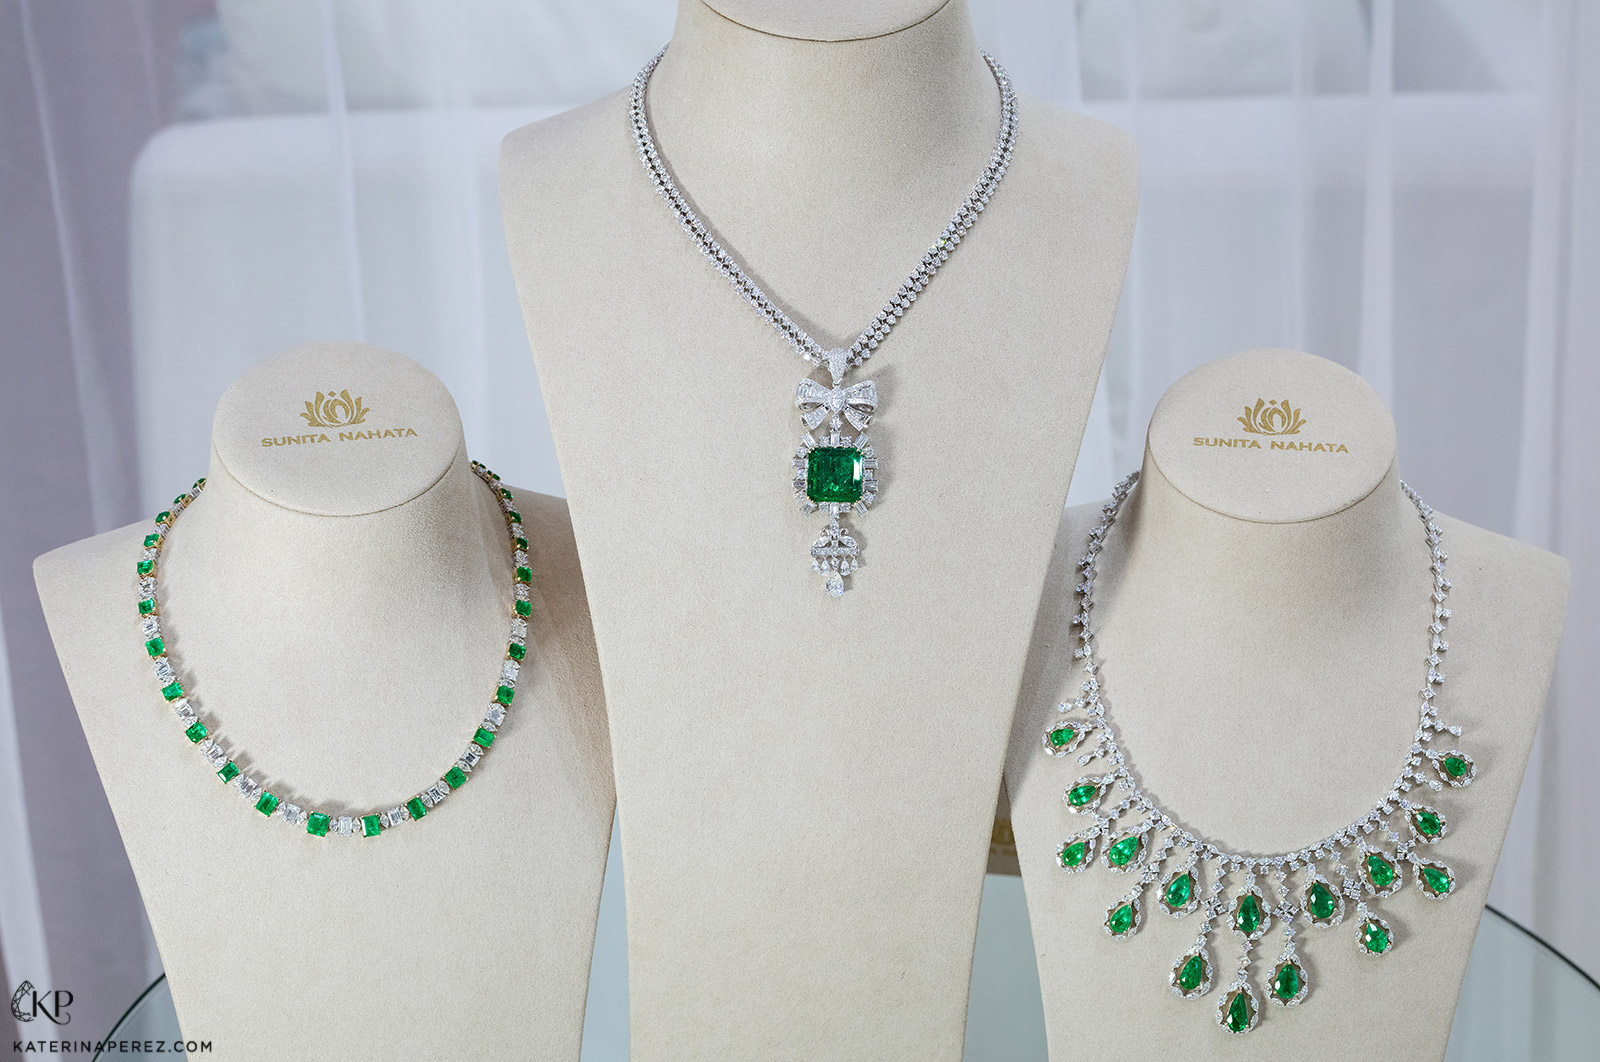 Sunita Nahata 'Regalia' collection (from left to right) single strand necklace with 19.70ct Colombian emeralds and 16.20ct diamonds, ‘Star’ necklace with 22.31ct Colombian Muzo emerald and 9.53ct diamonds, and long drop necklace with 27.16ct Colombian emeralds and 32.21ct diamonds, all in 18k white gold